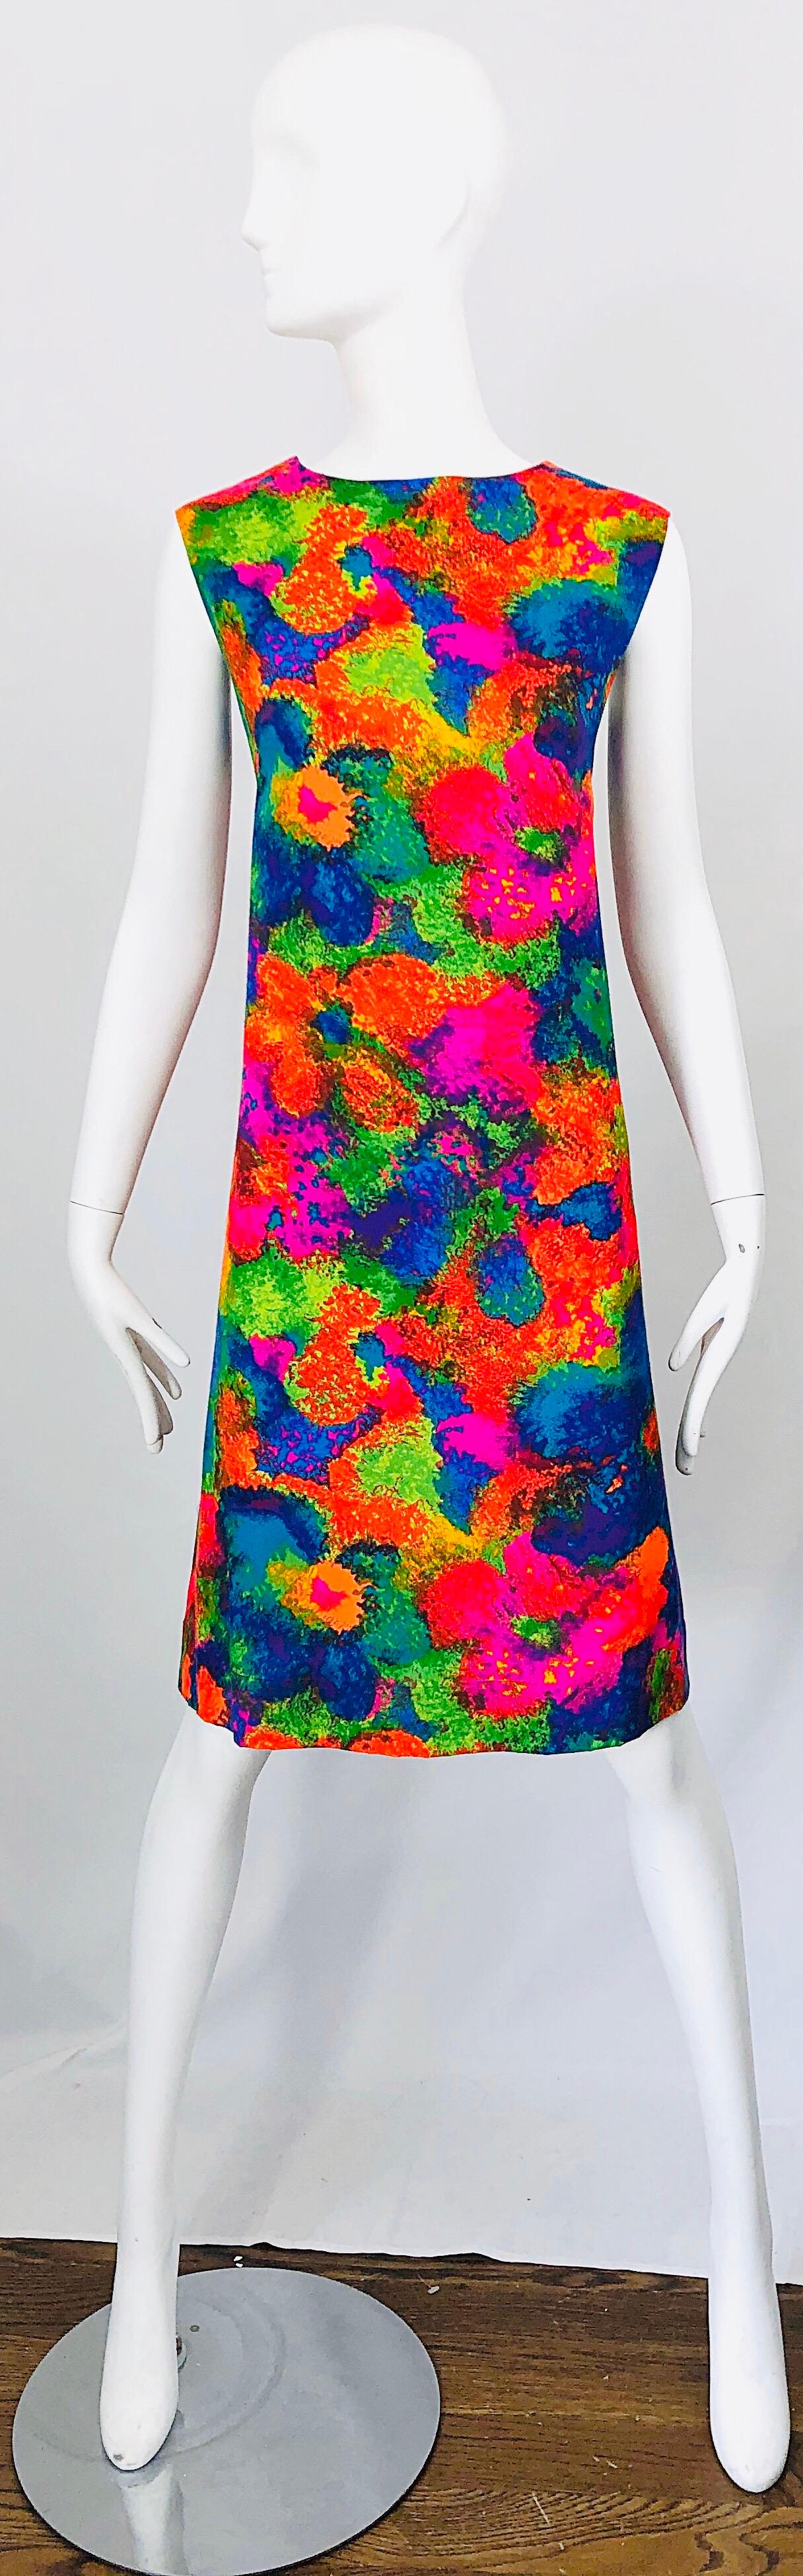 Chic 60s larger size neon abstract flower print cotton shift dress! Features vibrant colors of hot pink, neon orange, neon lime green, and bright blue throughout. hidden metal zipper up the back with hook-and-eye closure Can easily be dressed up or